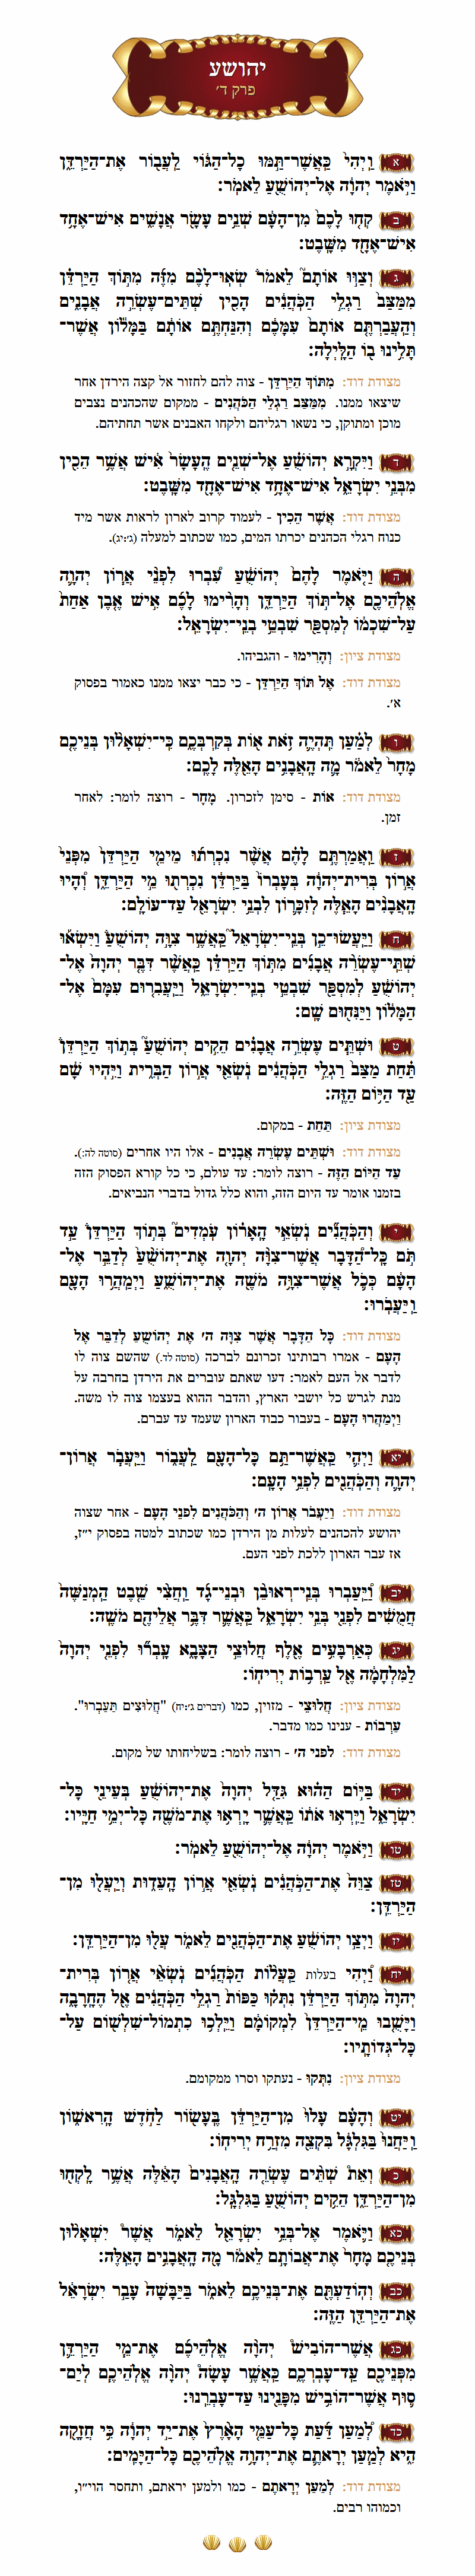 Sefer Yehoshua Chapter 4 with commentary